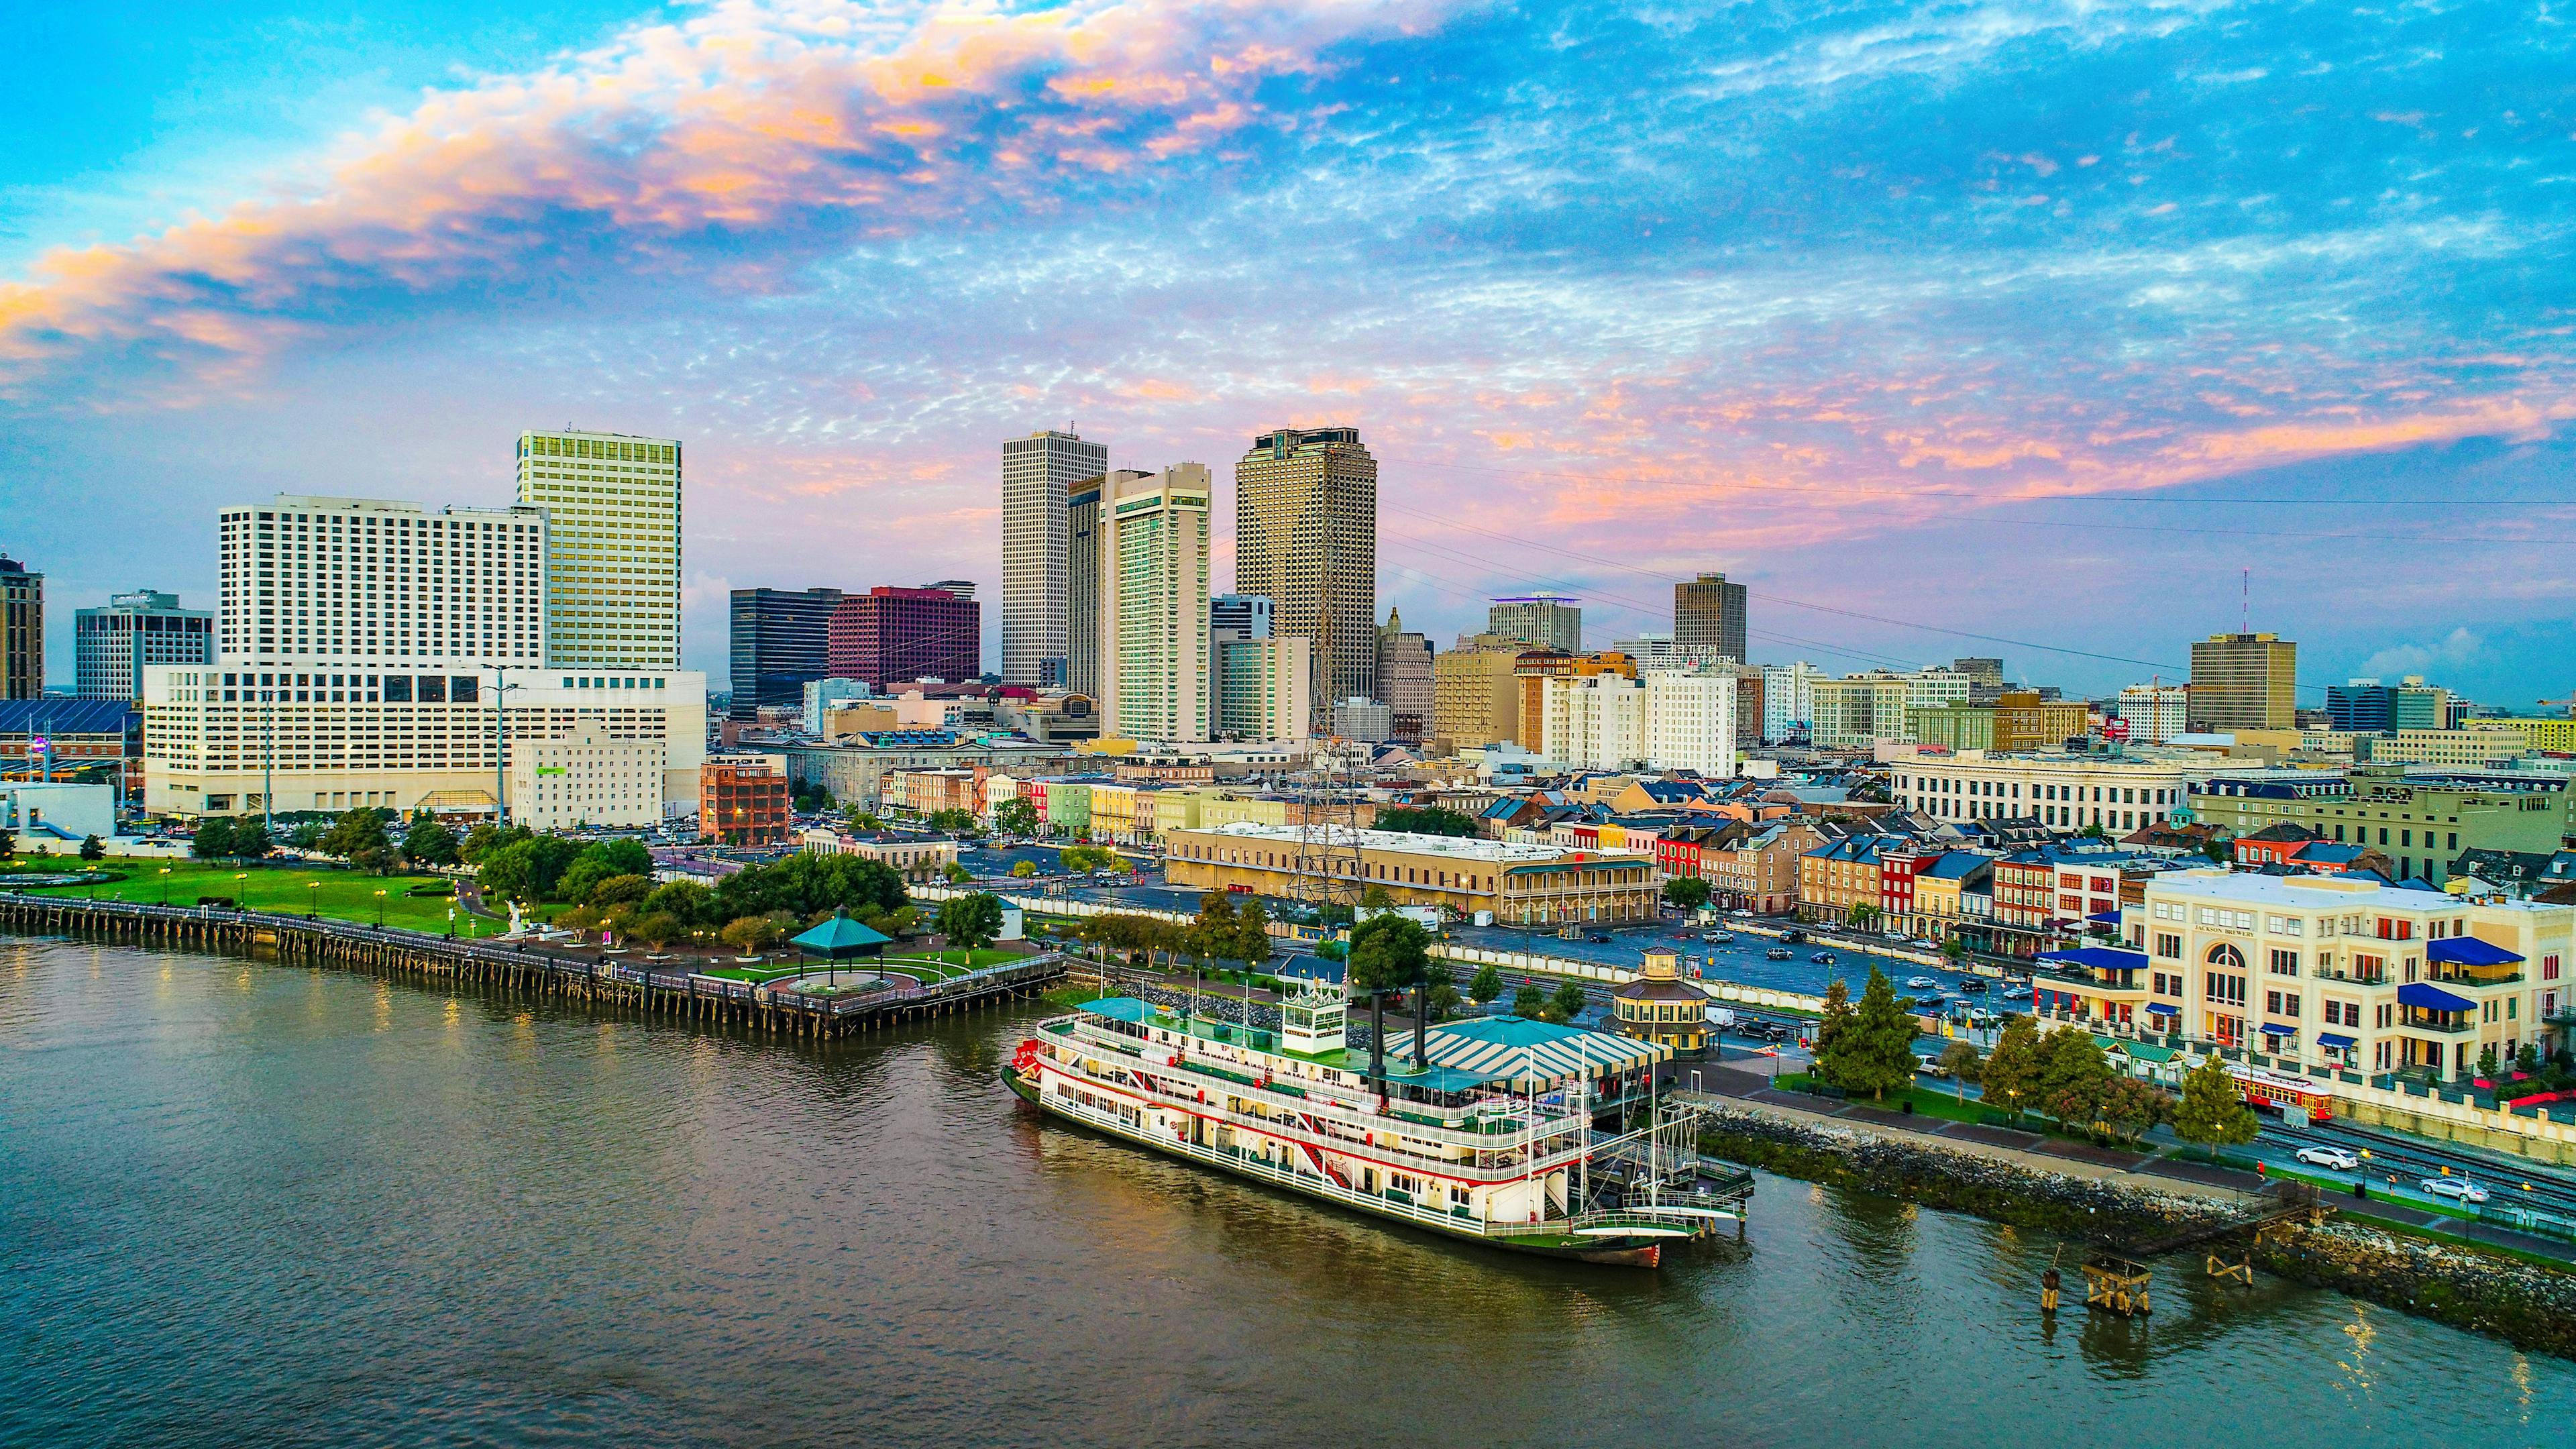 New Orleans, Louisiana, USA Downtown Skyline Aerial - Image credit: Kevin Ruck | stock.adobe.com